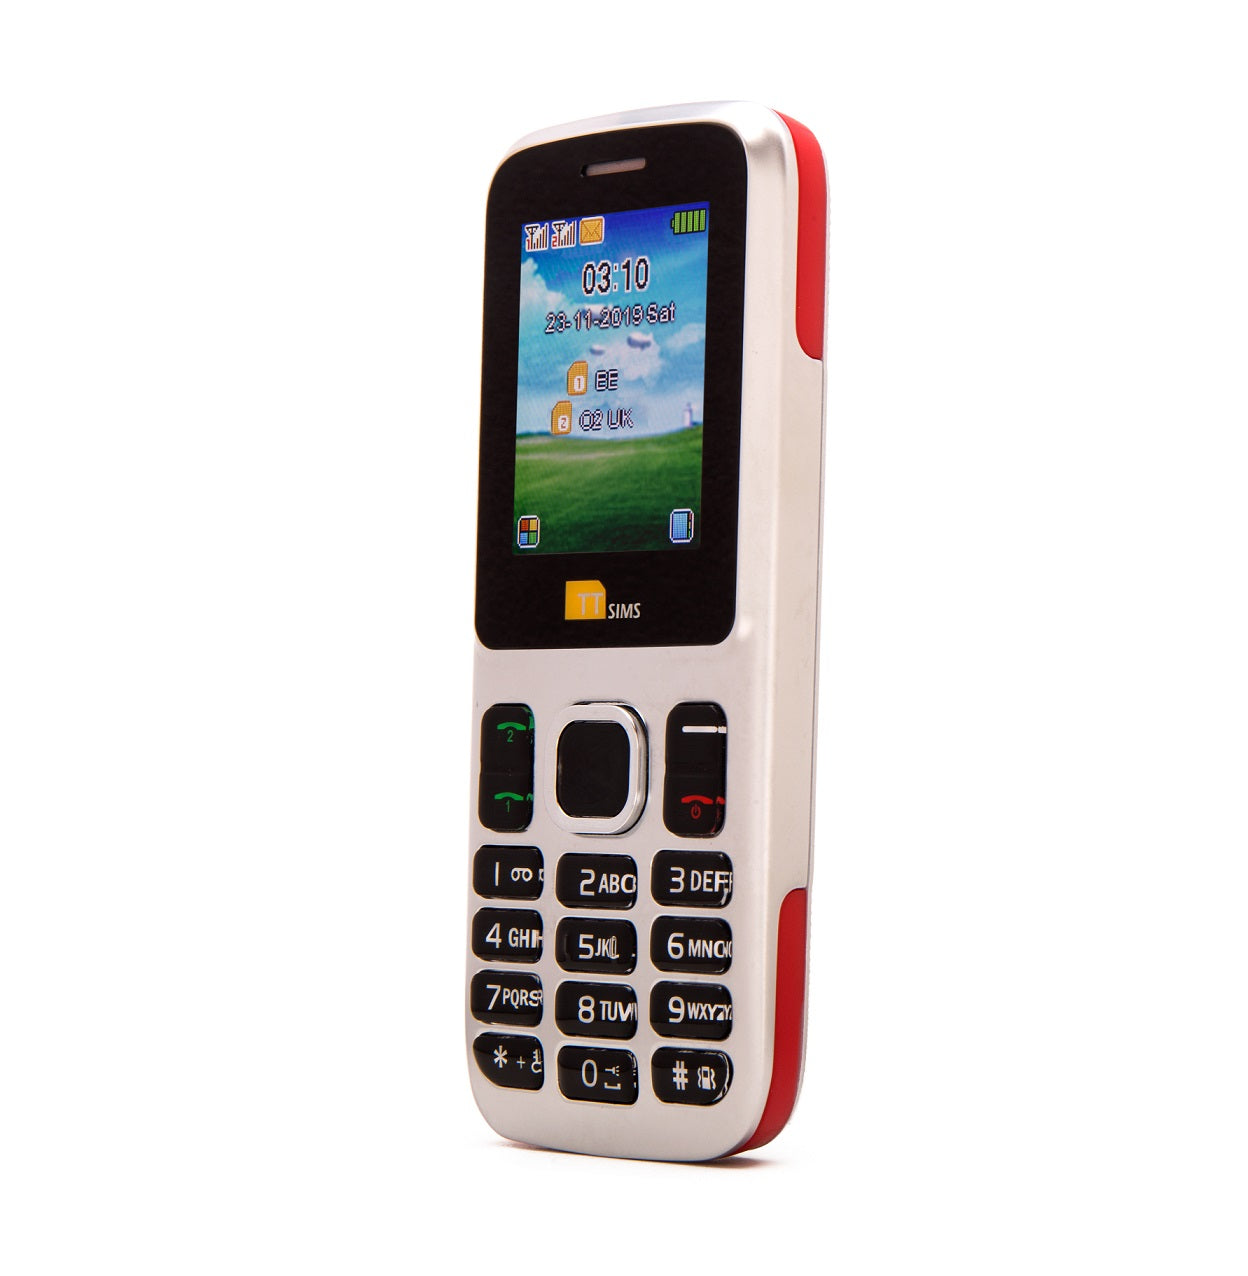 TTfone Red TT130 Dual Sim - Warehouse Deals with Mains Charger and Vodafone Pay As You Go